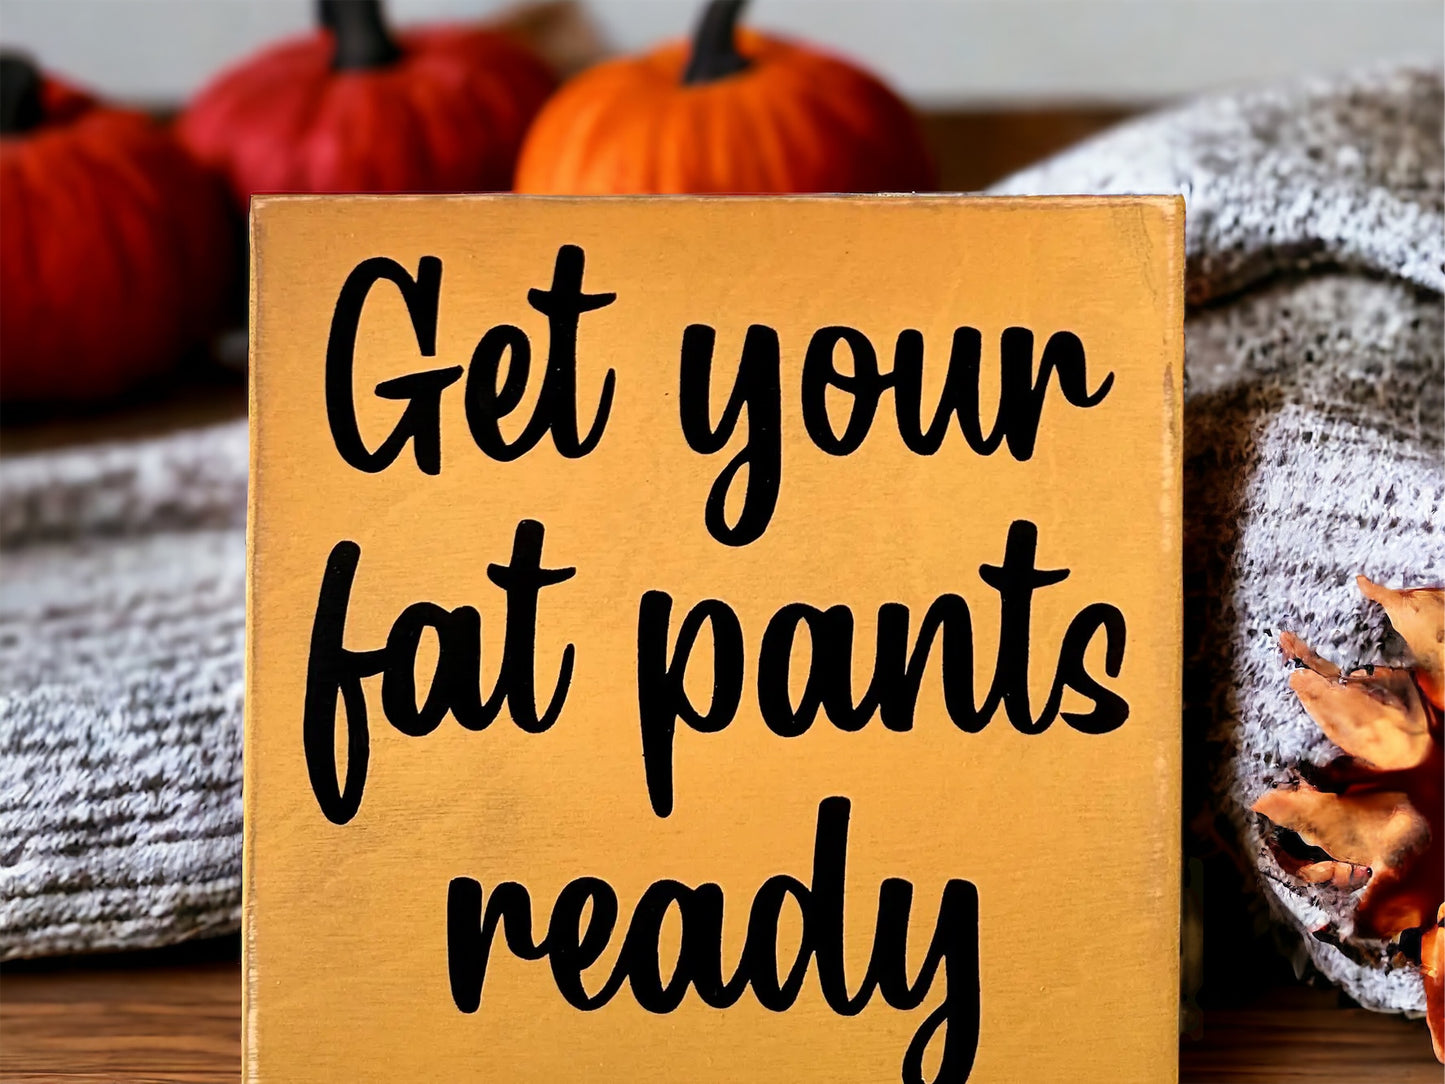 Get Your Fat Pants Ready - Funny Rustic Sign